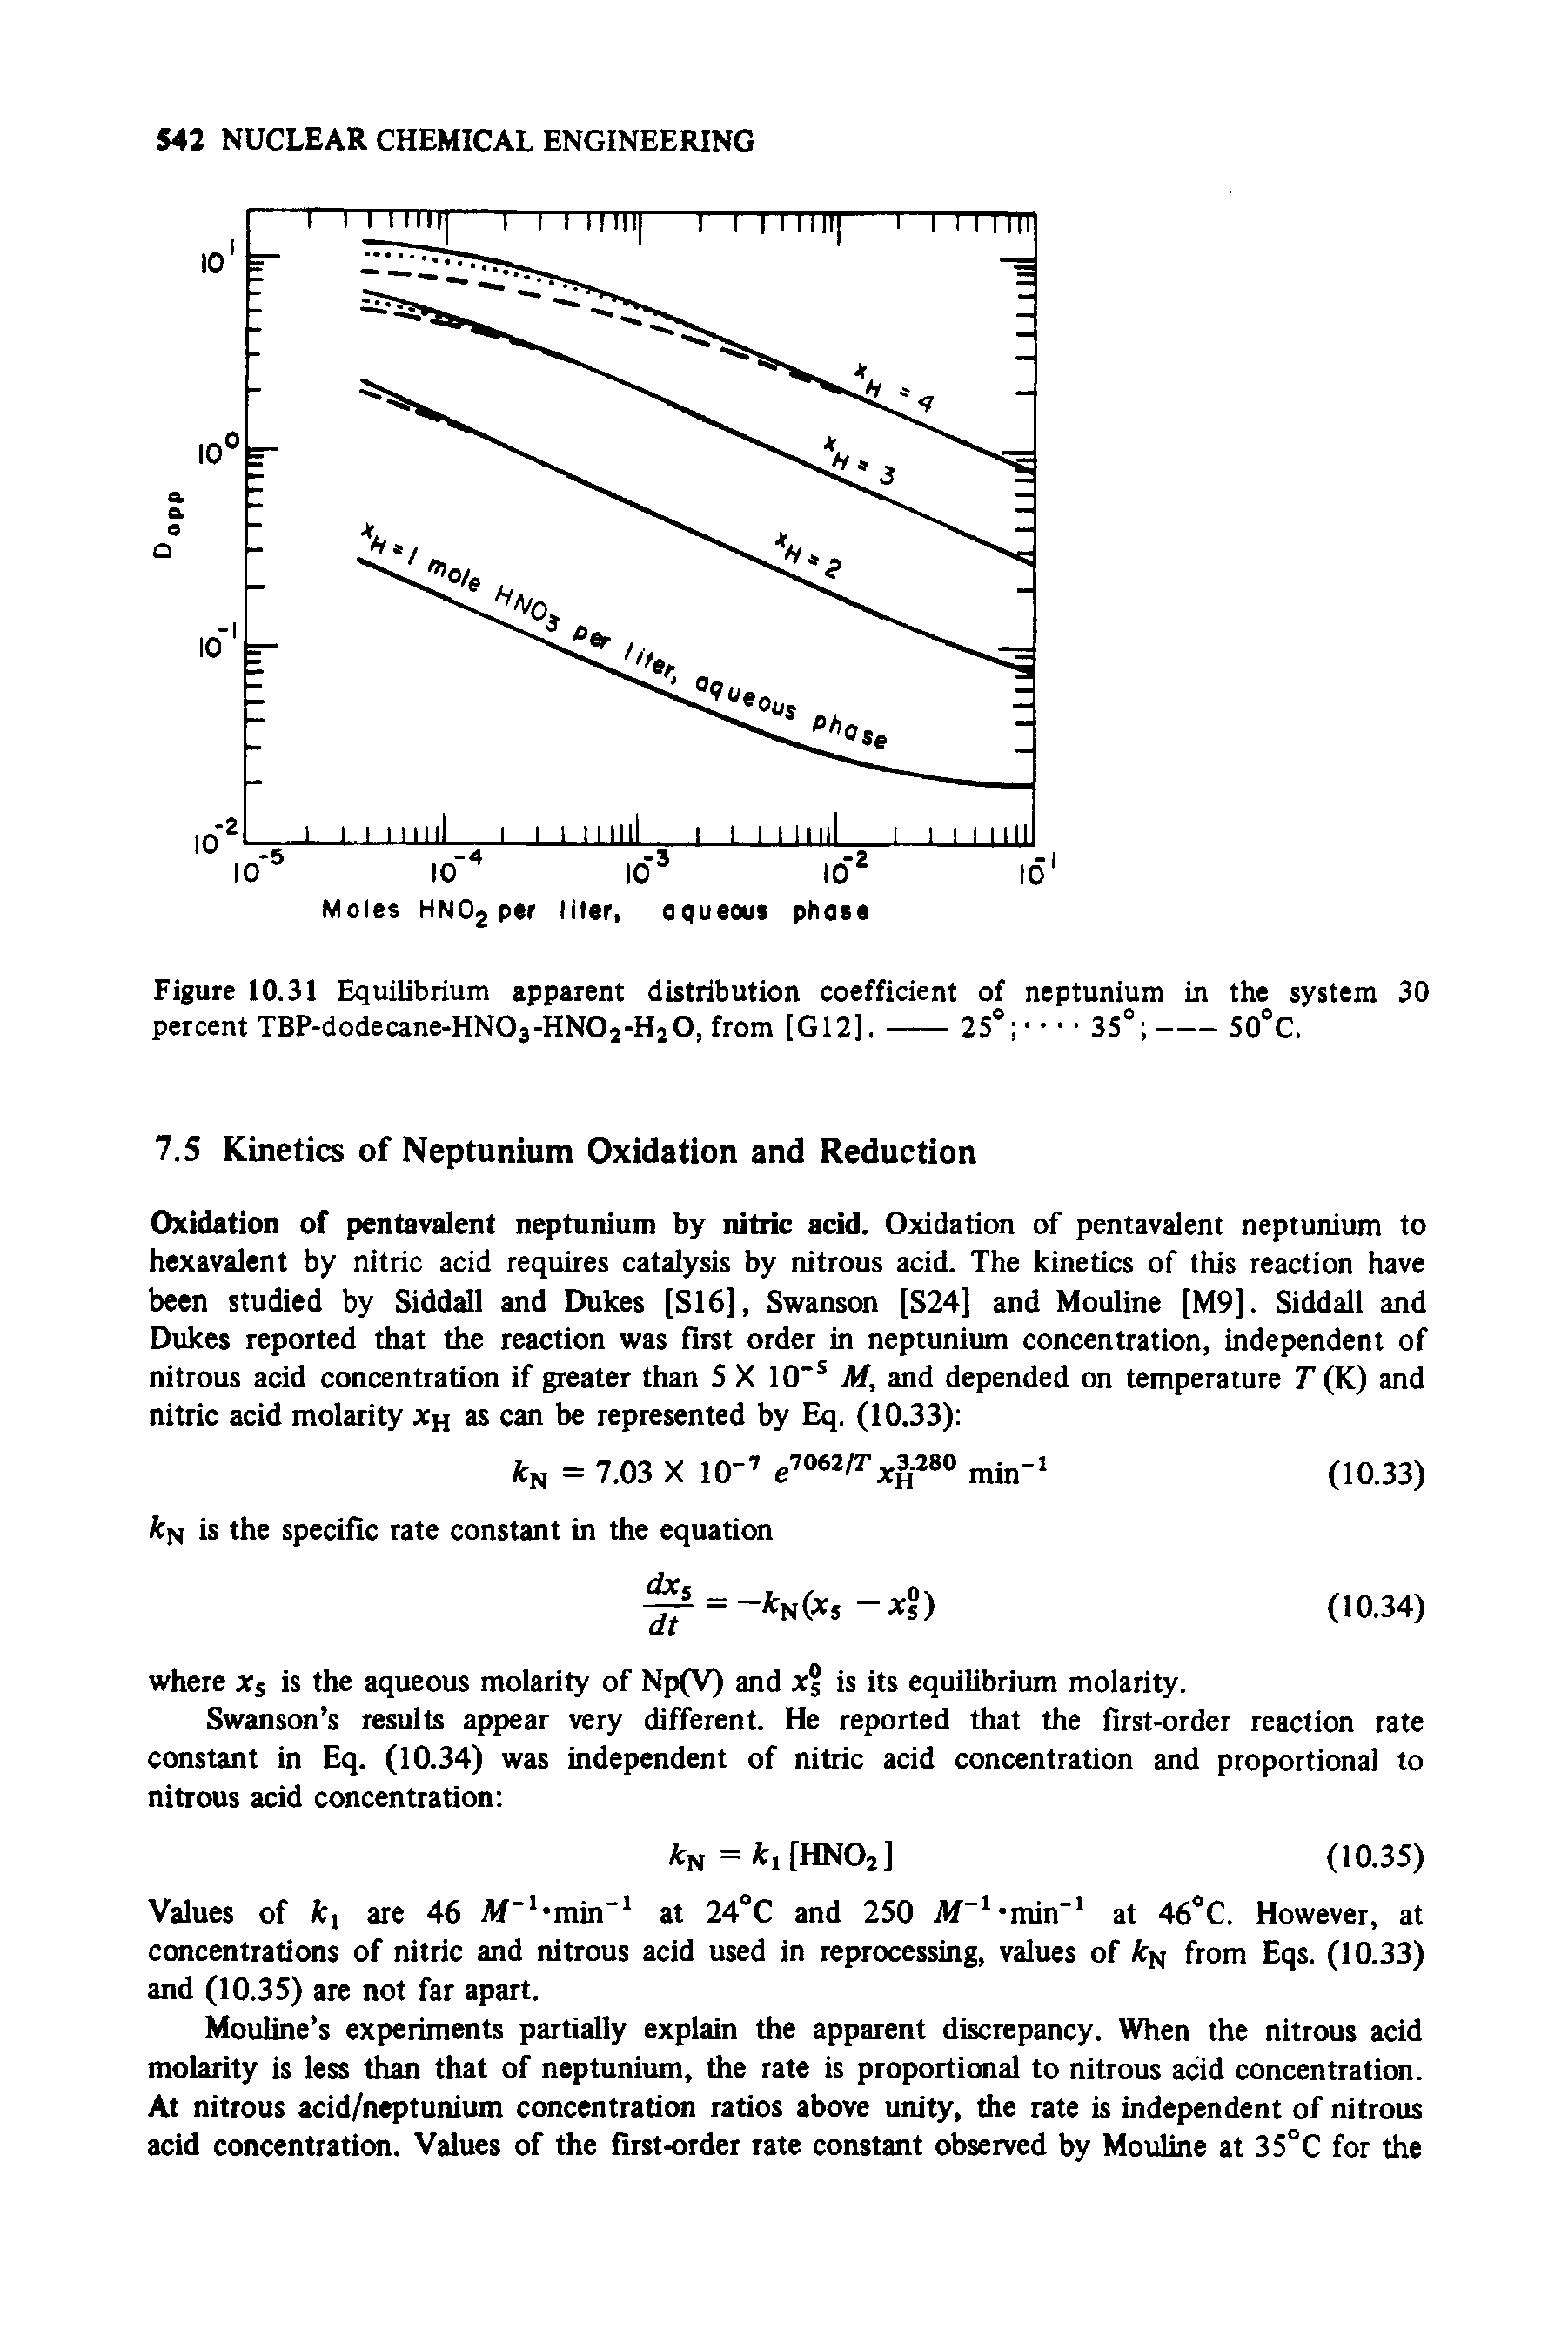 Figure 10.31 Equilibrium apparent distribution coefficient of neptunium in the system 30 percent TBP-dodecane-HNOj-HNOs-HjO, from [G12].-2S - 35° -50°C.